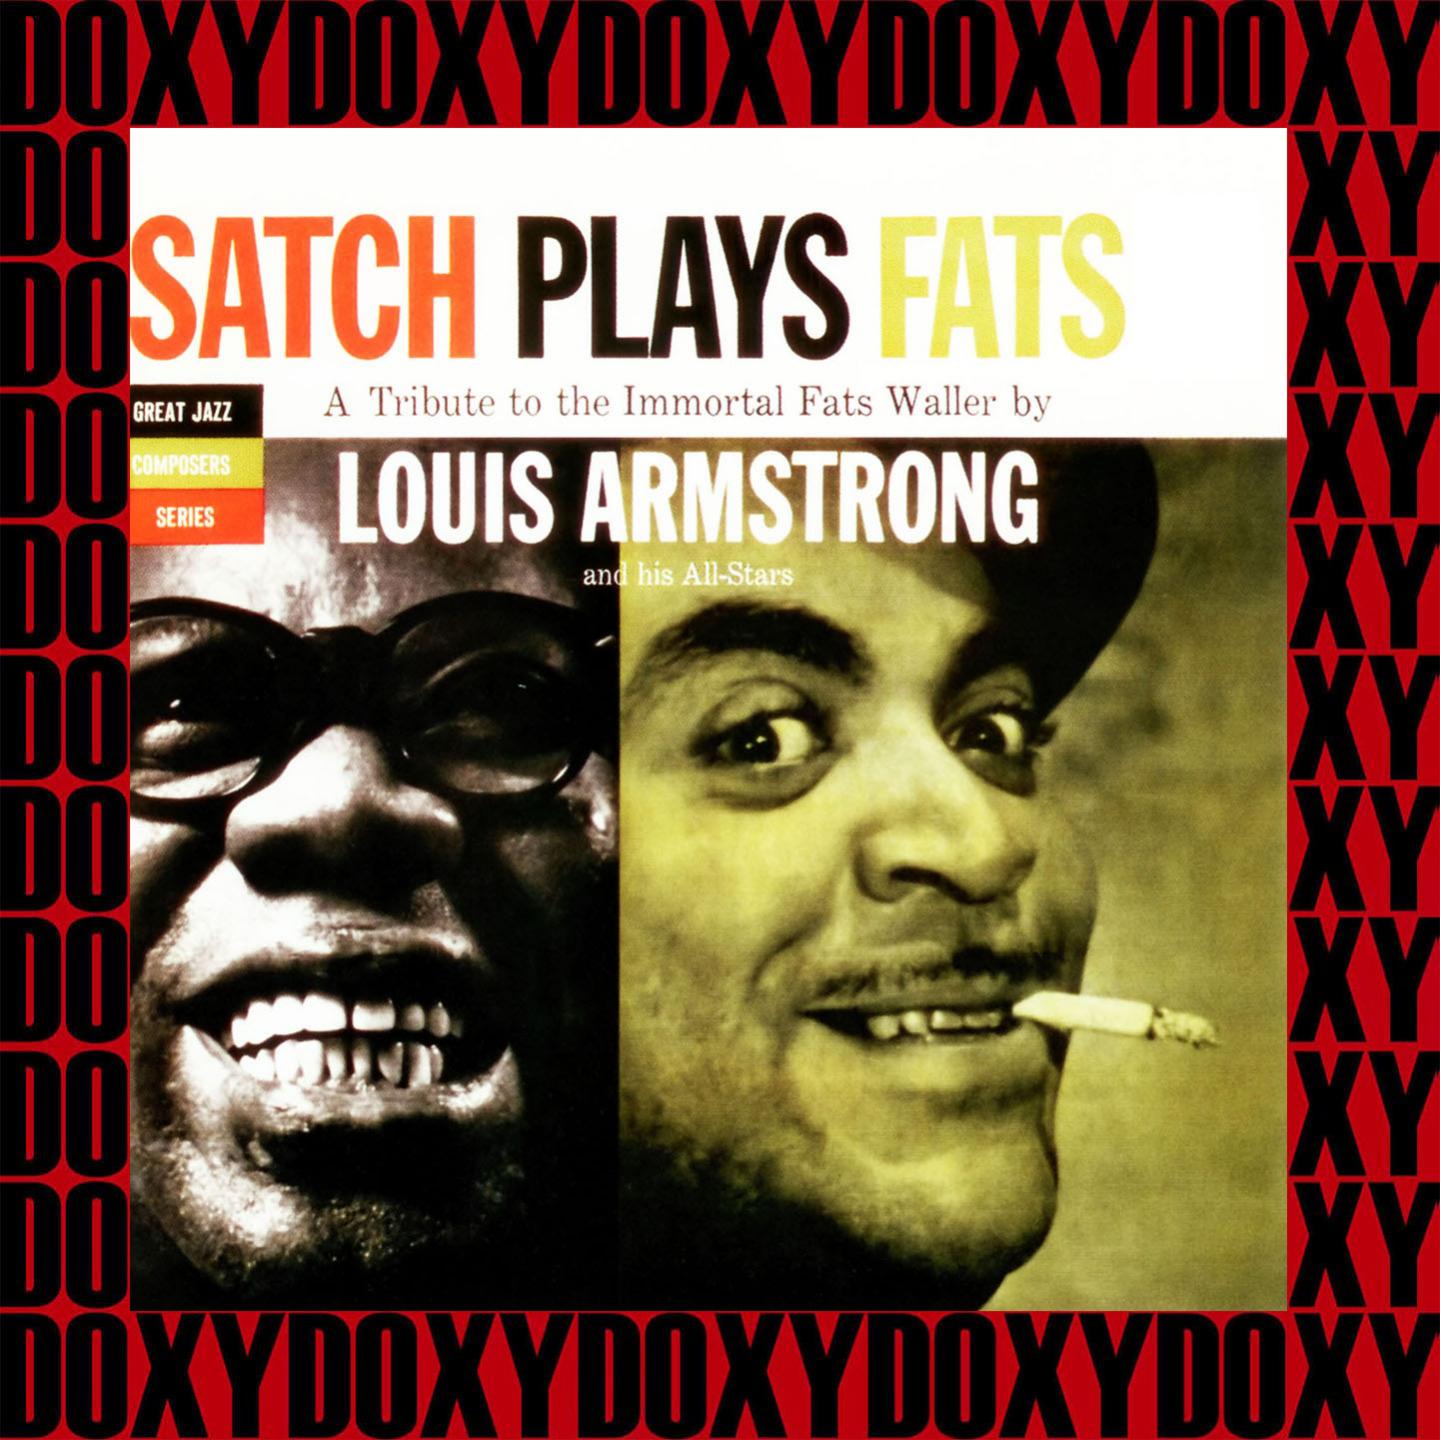 Satch Plays Fats, A Tribute To The Immortal Fats Waller (Expanded, Great Jazz Composers, Remastered Version) (Doxy Collection)